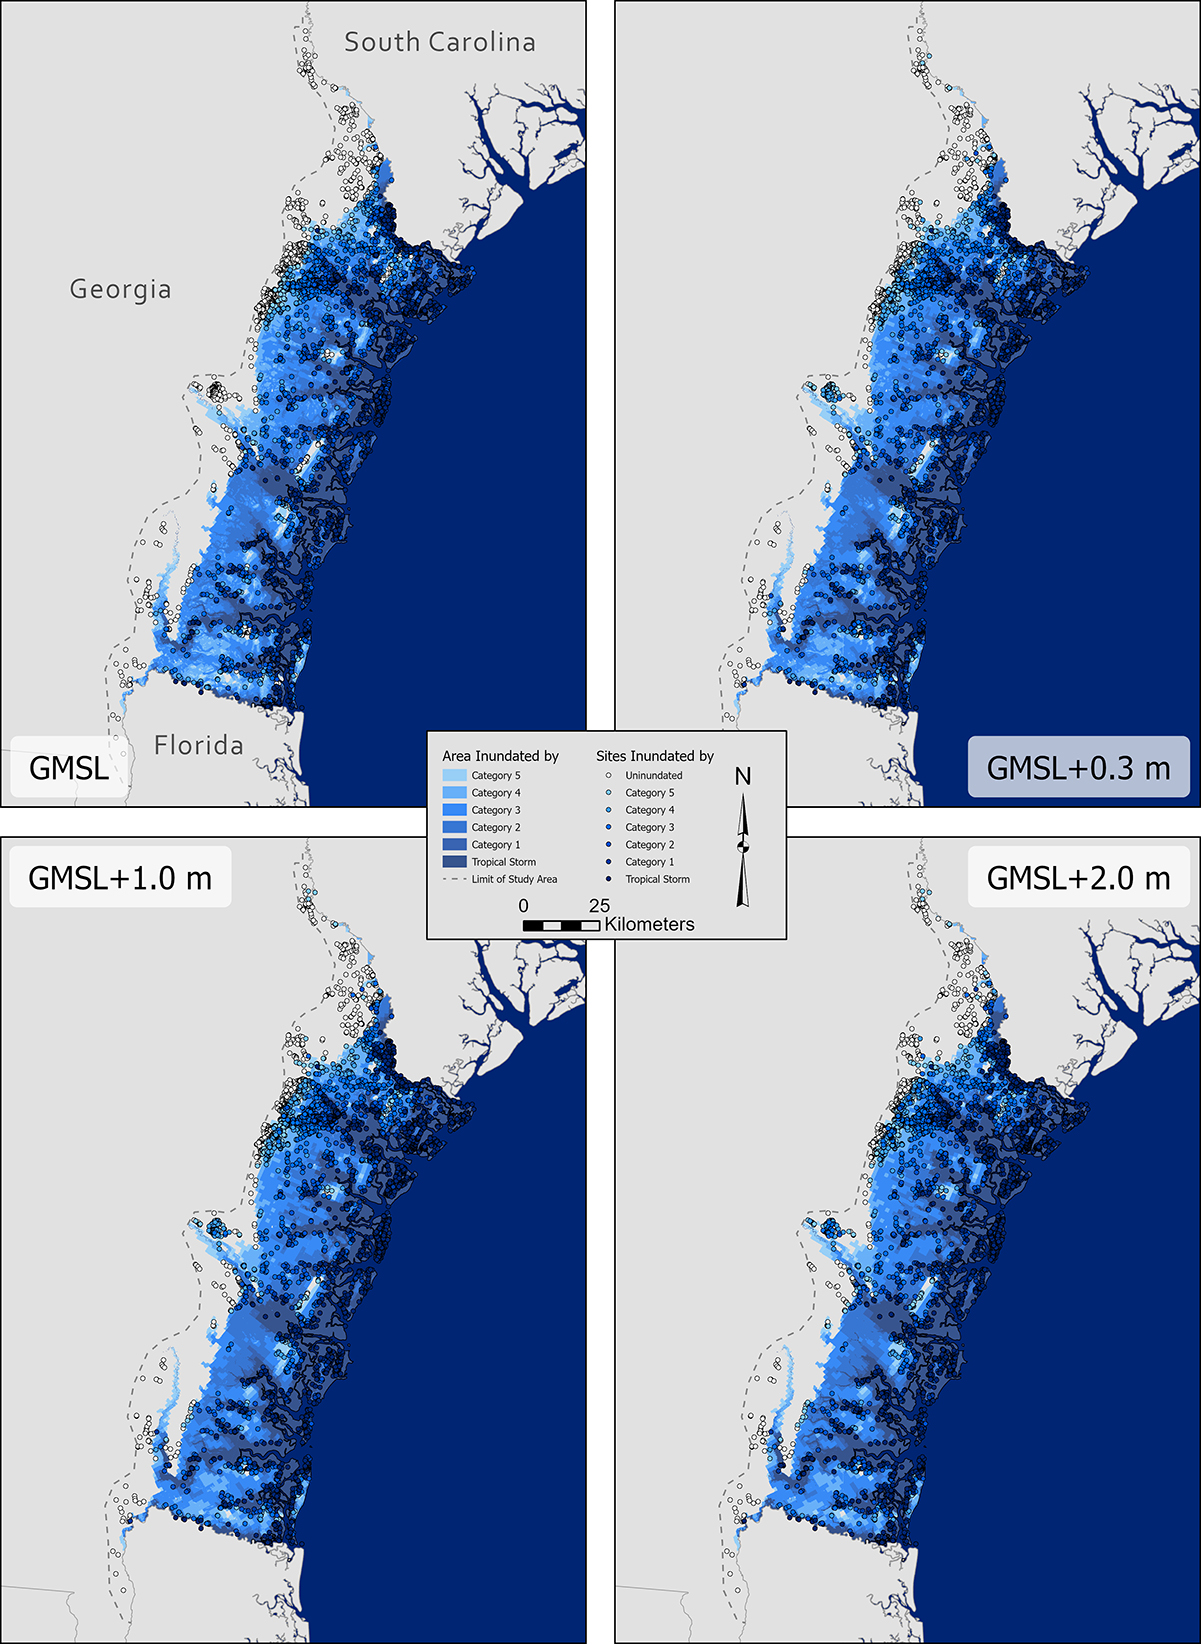 Worst-case scenarios for storm surge inundation along the Georgia coast according to increasingly severe hurricanes and sea level rise scenarios as modeled in the paper.